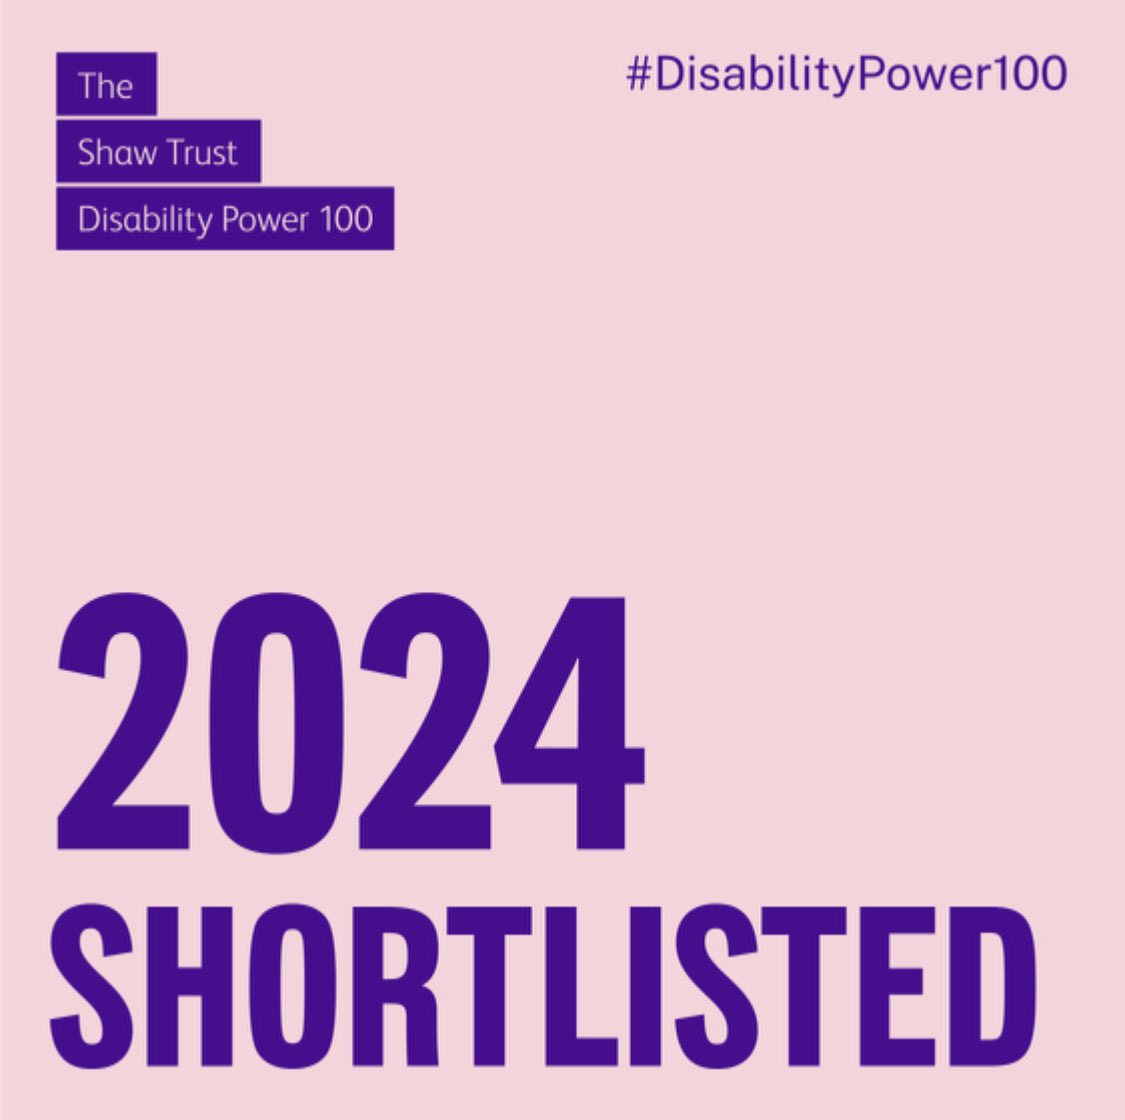 NEWS! I’ve been shortlisted for the #DisabilityPower100 2024 by @ShawTrust

The nominations celebrate people who influence, impact and innovate in the disability community, pushing the conversations around disability forward. Let’s keep moving forward. Together
#DisabilityRights